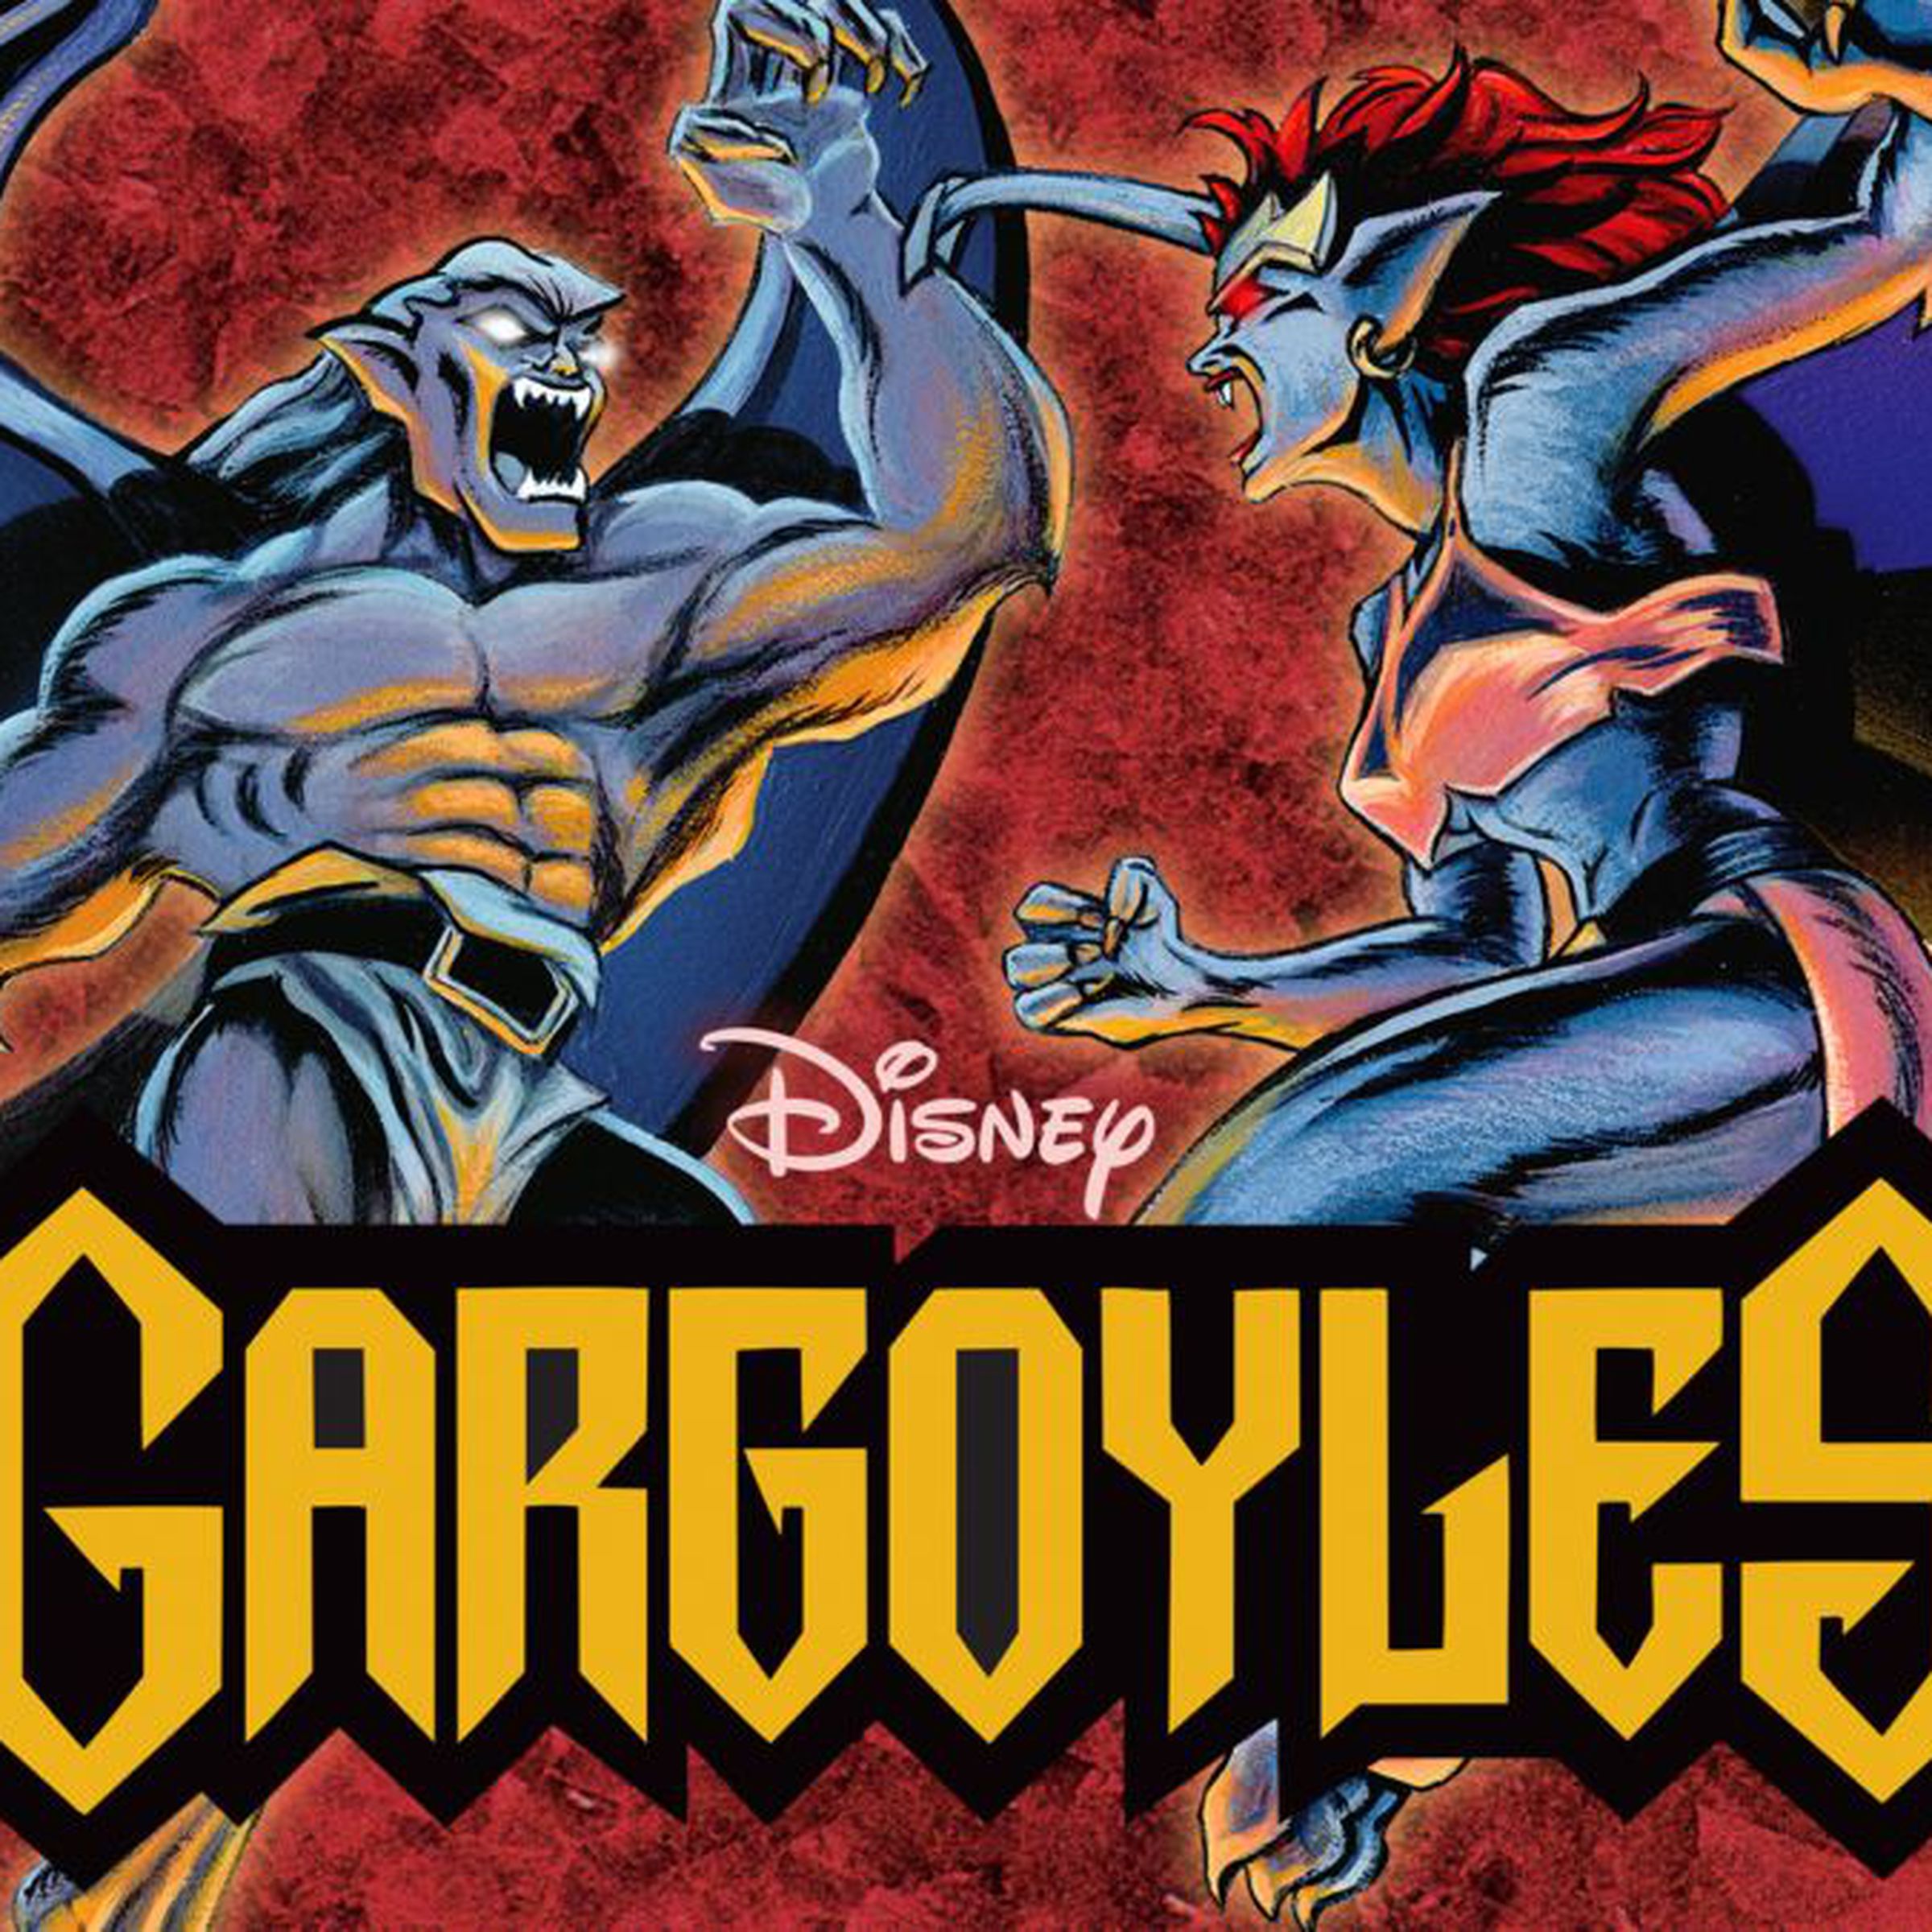 And image of a male gargoyle and female gargoyle about to attack each other on a red background. In the foreground is the text Disney’s Gargoyles.